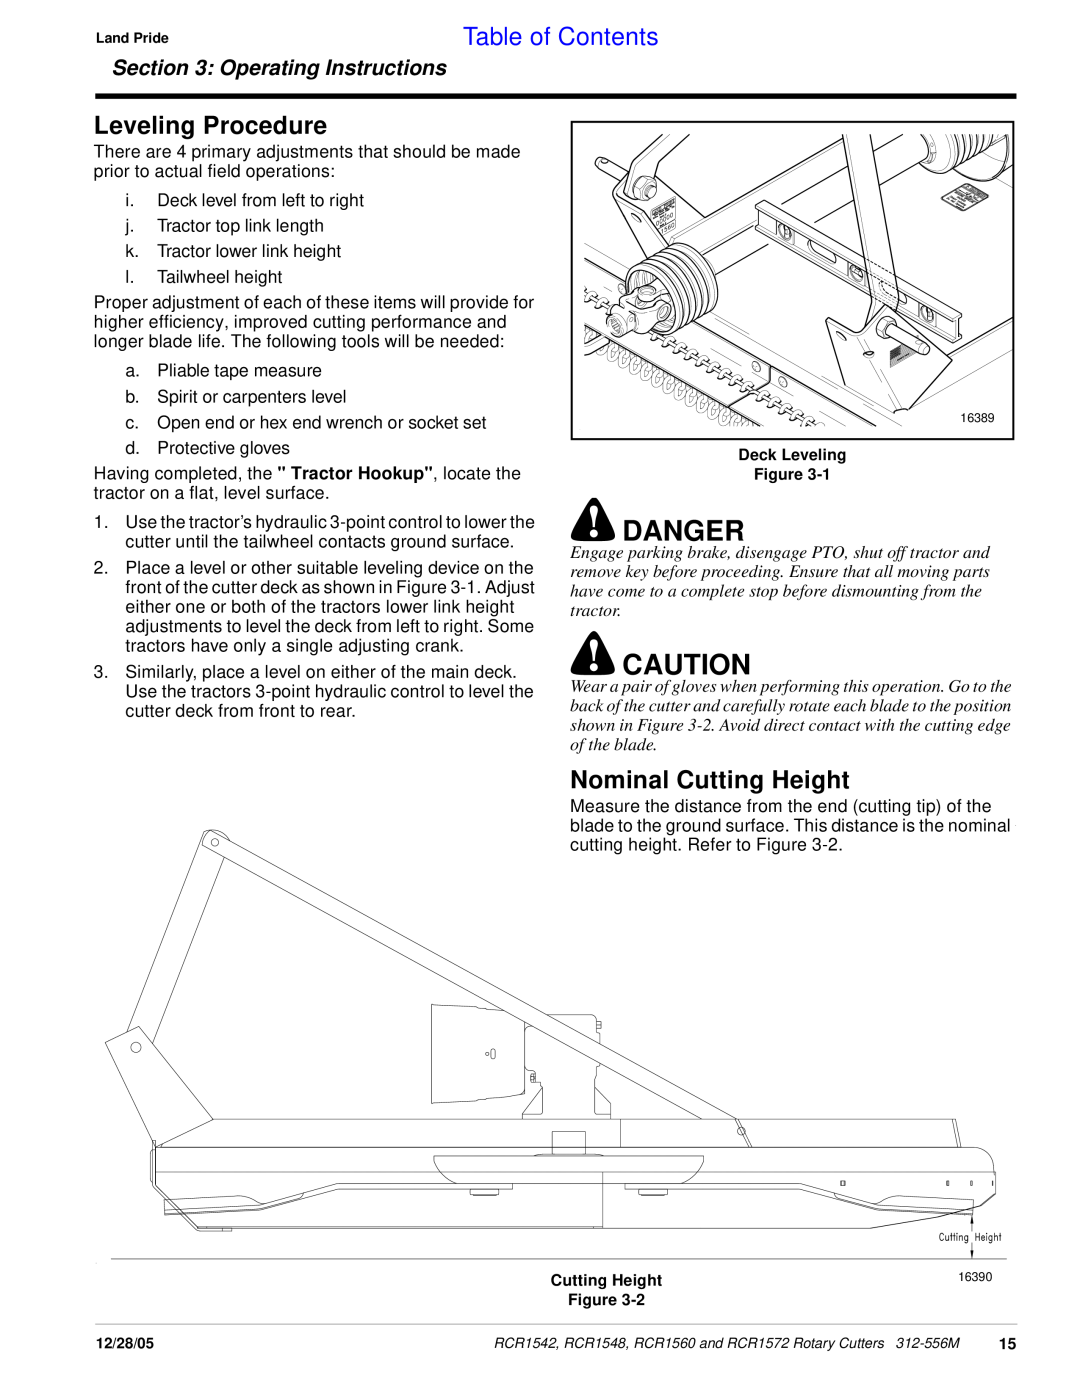 Land Pride RCR1572, RCR1560 Leveling Procedure, Nominal Cutting Height, Danger, Table of Contents, Operating Instructions 